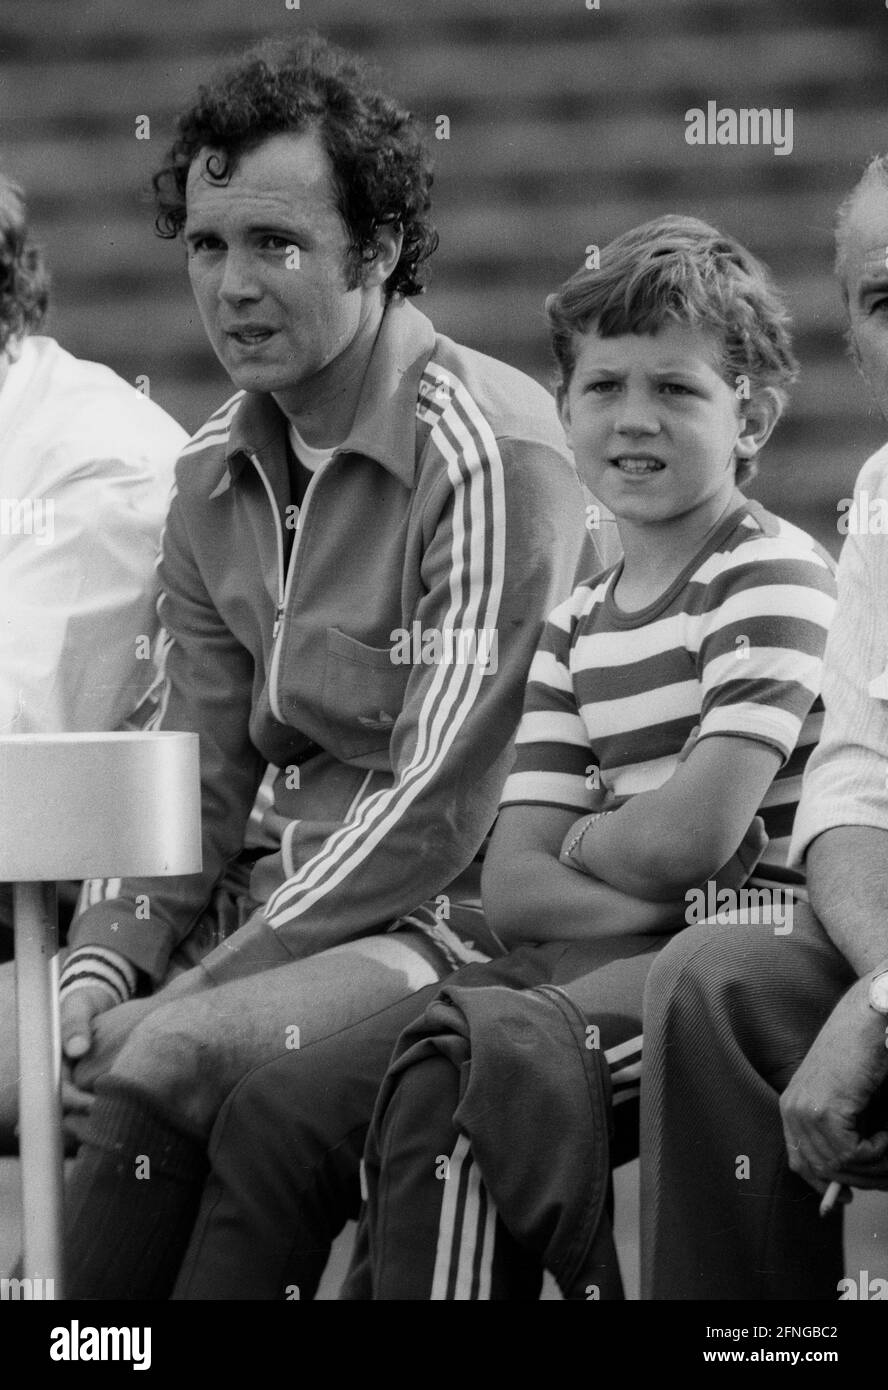 Franz Beckenbauer (FC Bayern München) as a spectator at the match of FC Bayern against Hertha BSC on 12.06.1976. [automated translation] Stock Photo